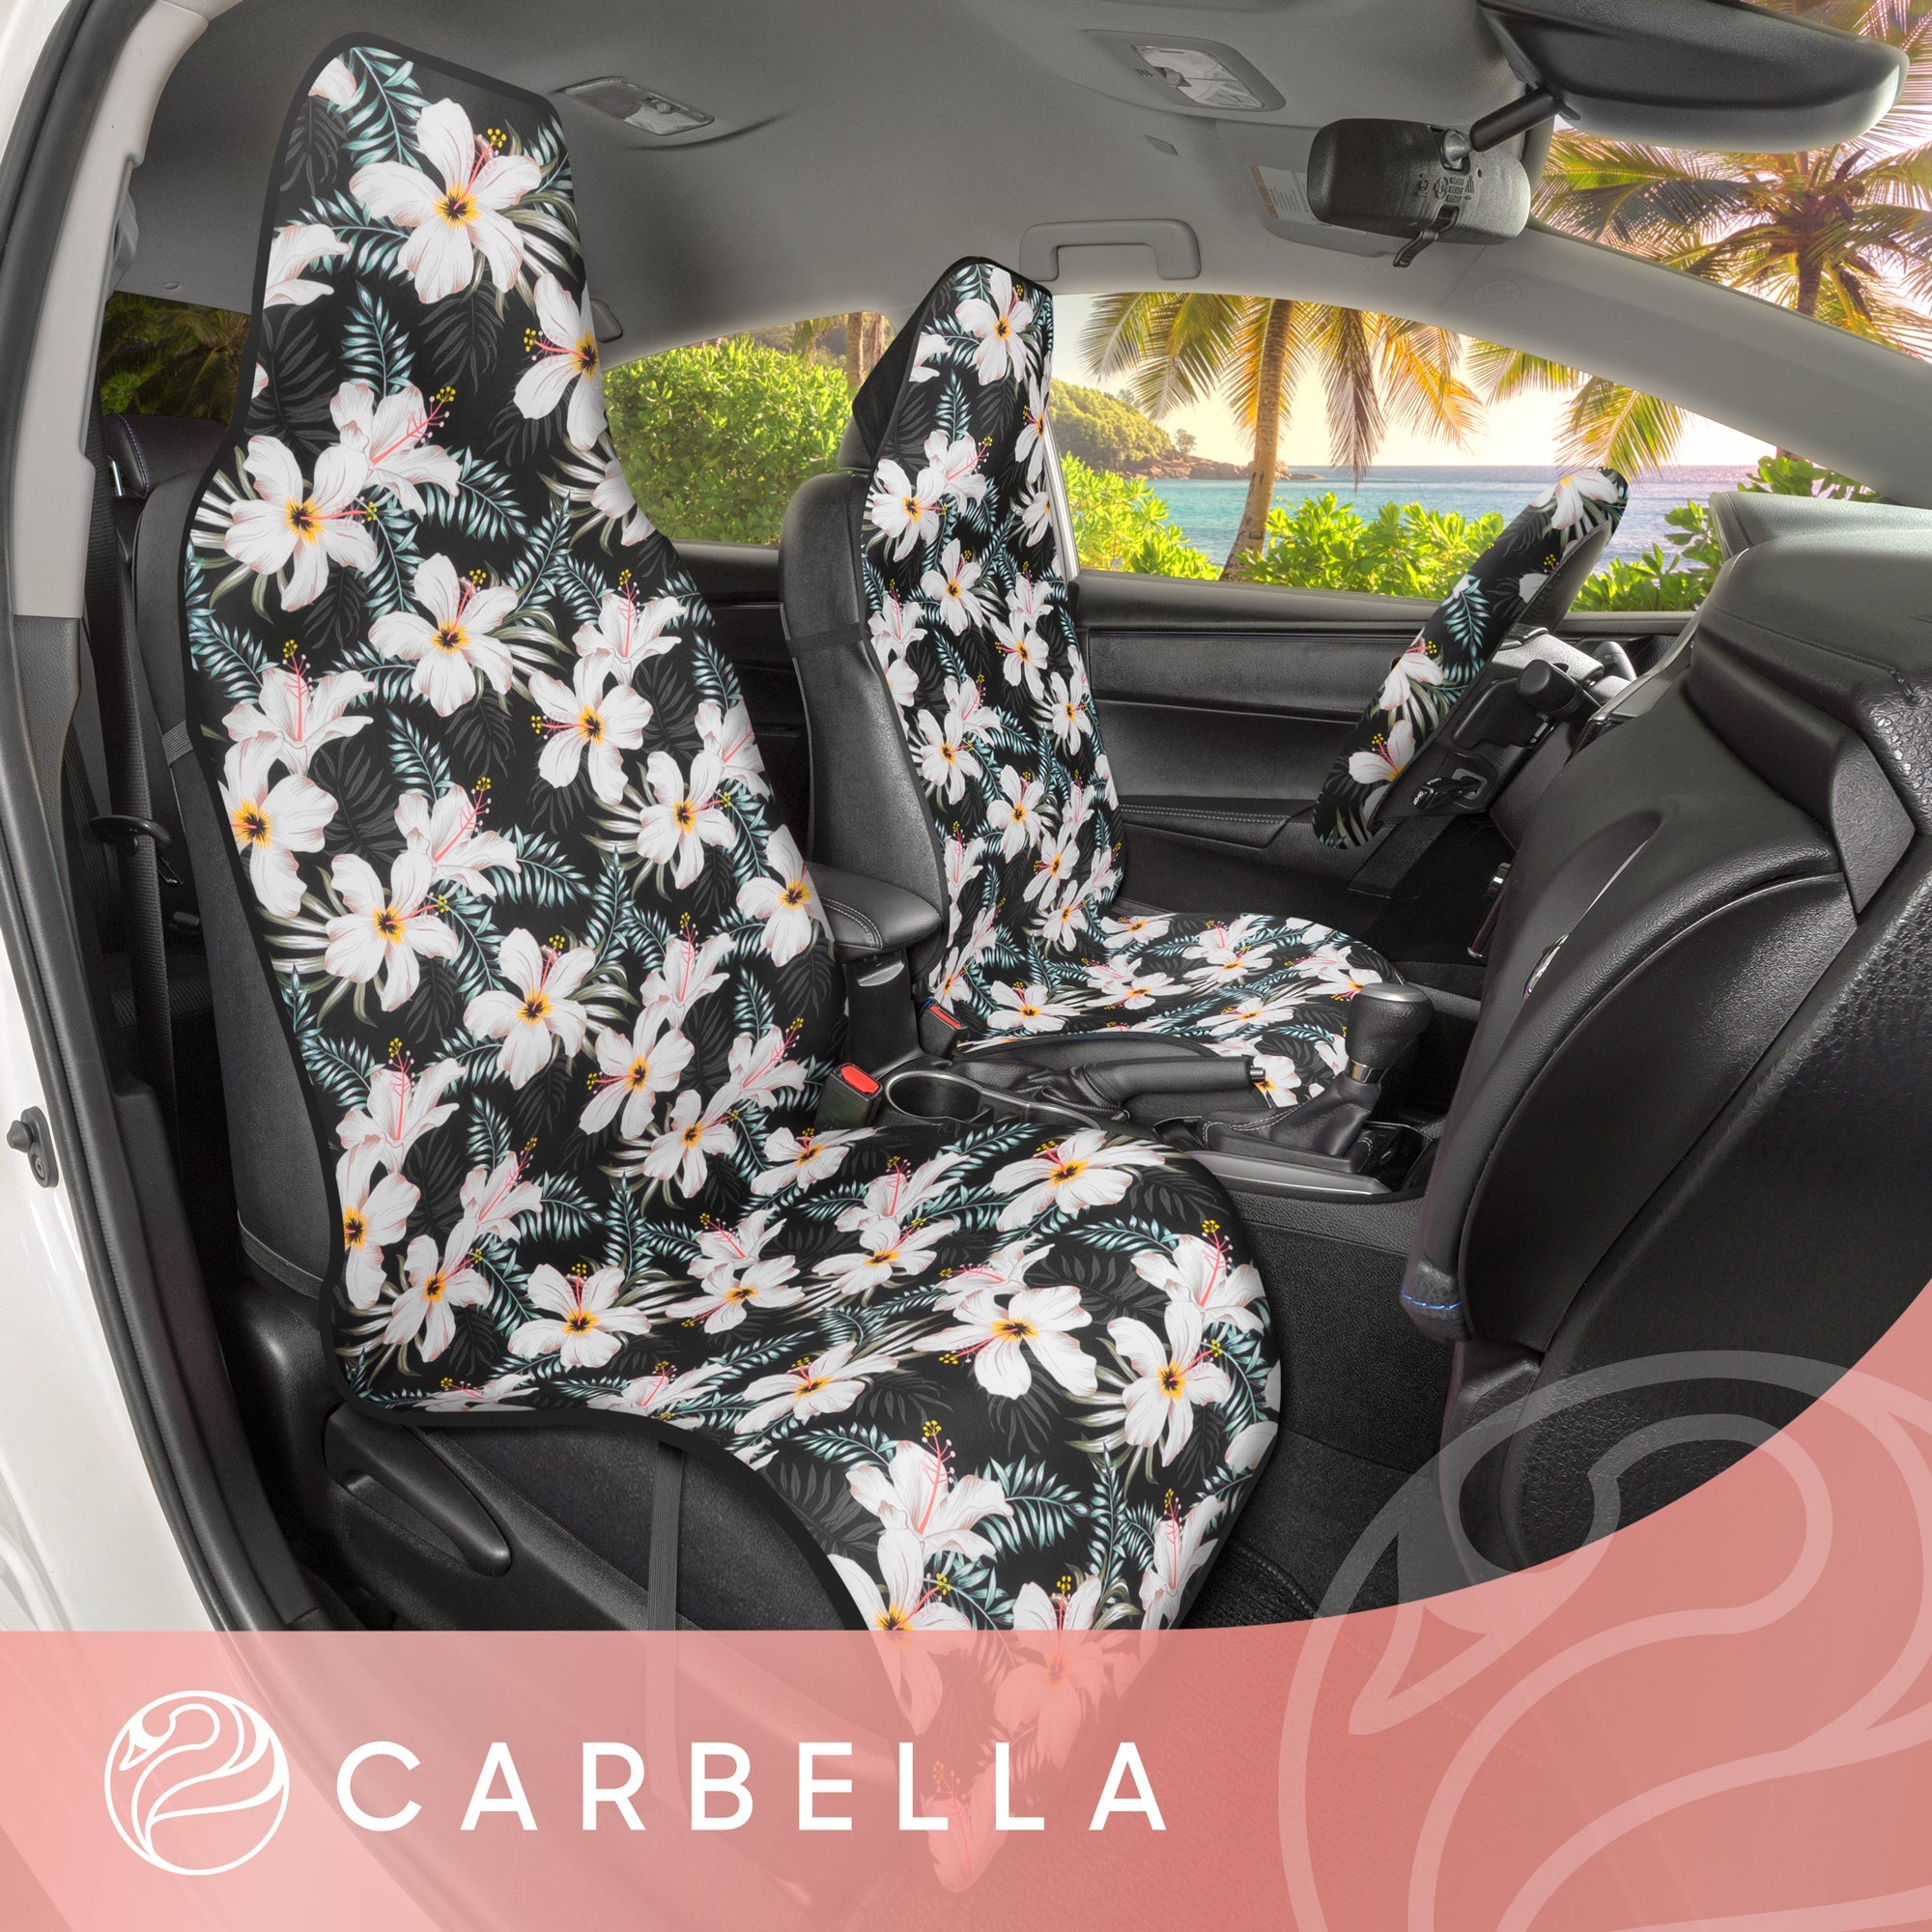 Carbella Tropical Floral Car Seat Covers, 2 Pack White Lily & Palm Leaves Front Seat Covers for Cars with Matching Steering Wheel Cover, for Trucks Van SUV, Car Accessories for Women